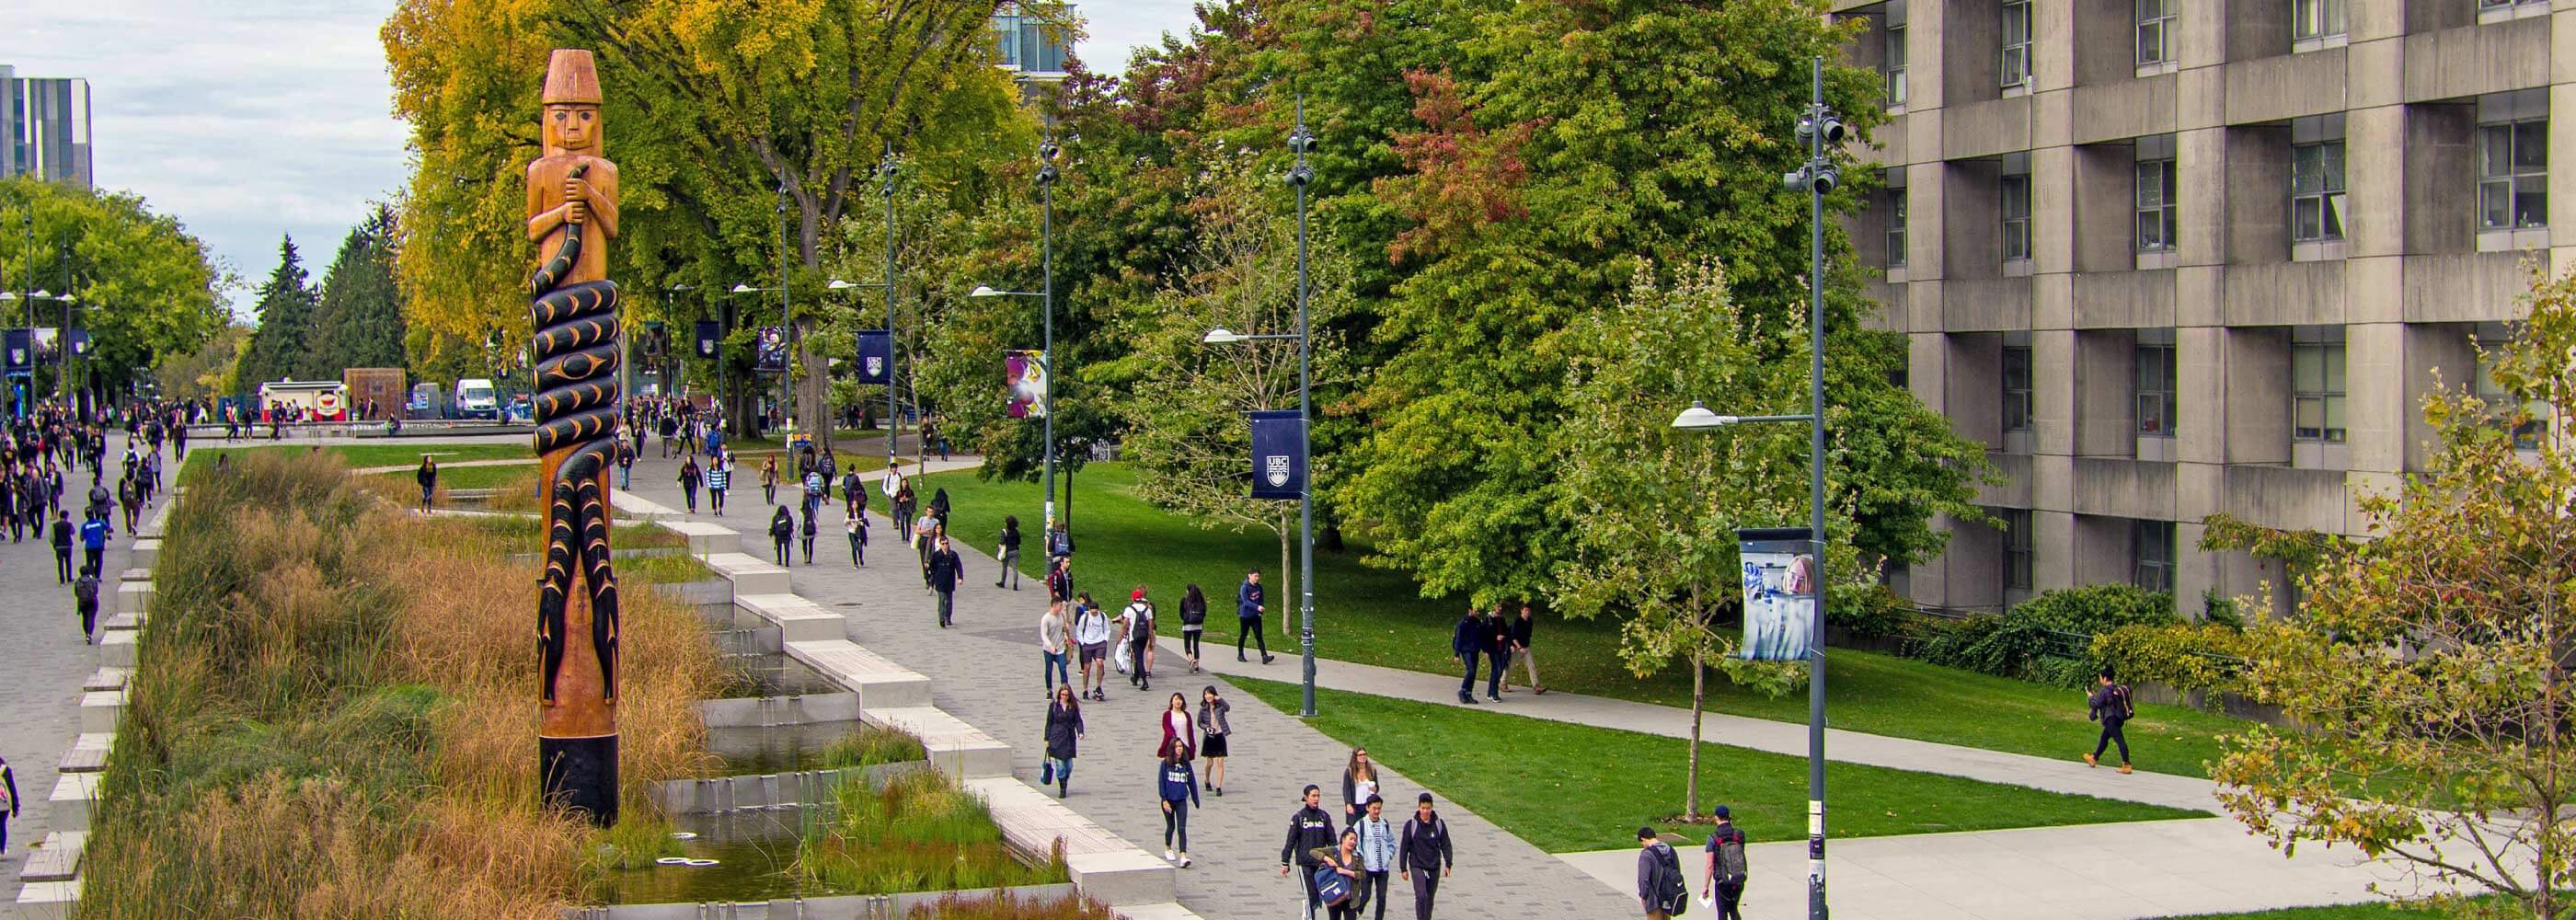 Groups of people tour the UBC Vancouver campus to see architecture, art and nature.